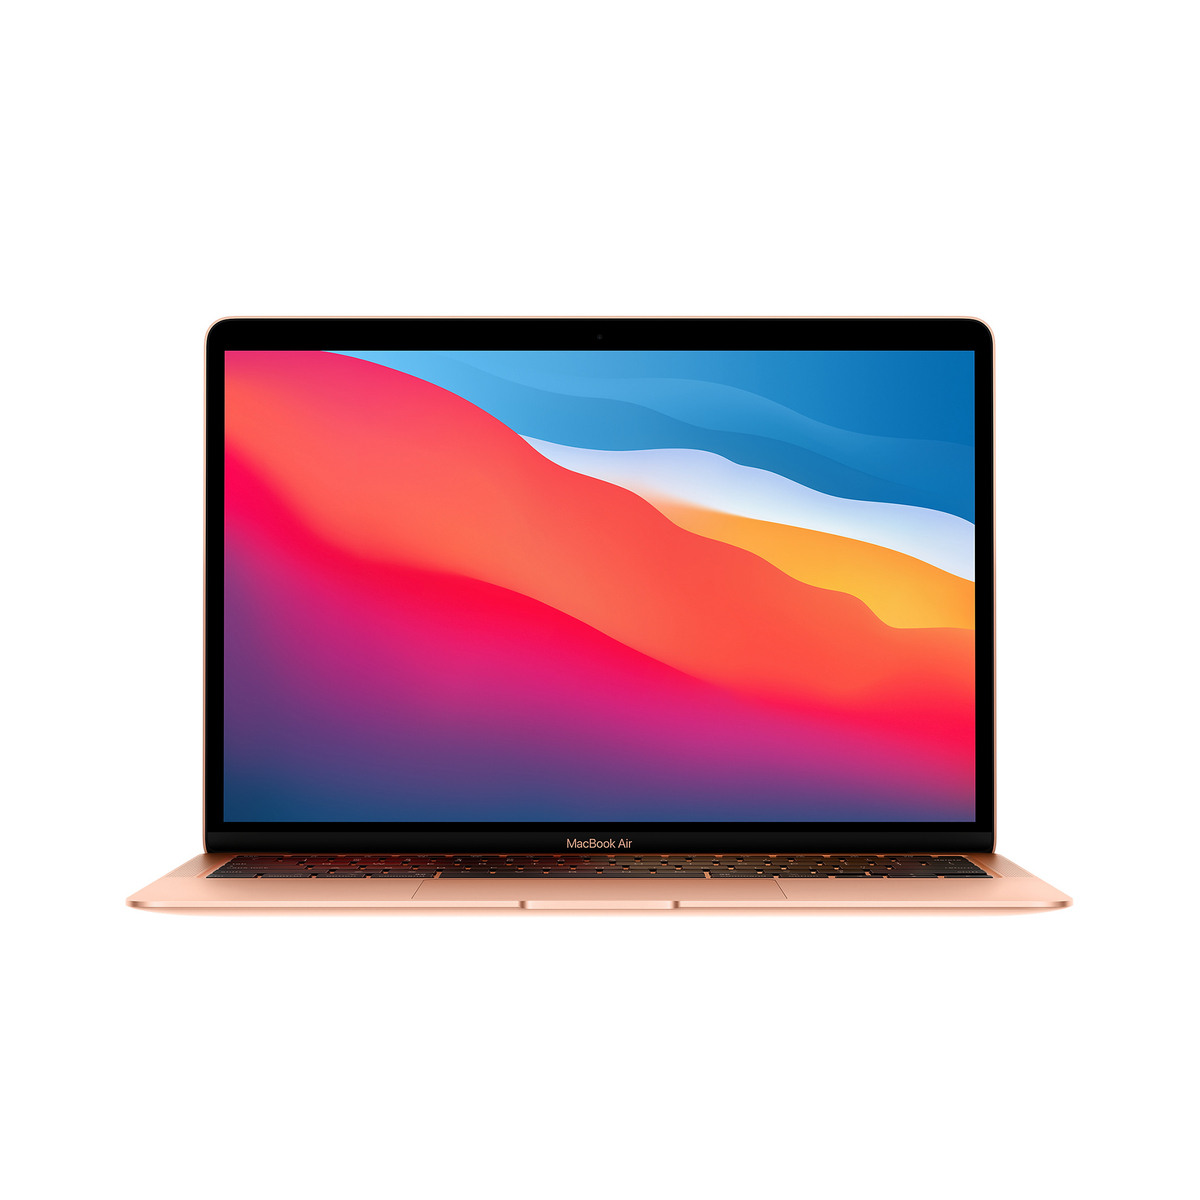 Apple MacBook Air 13"(MGND3AB/A), Apple M1 chip with 8-core CPU and 7-core GPU, 256GB - Gold